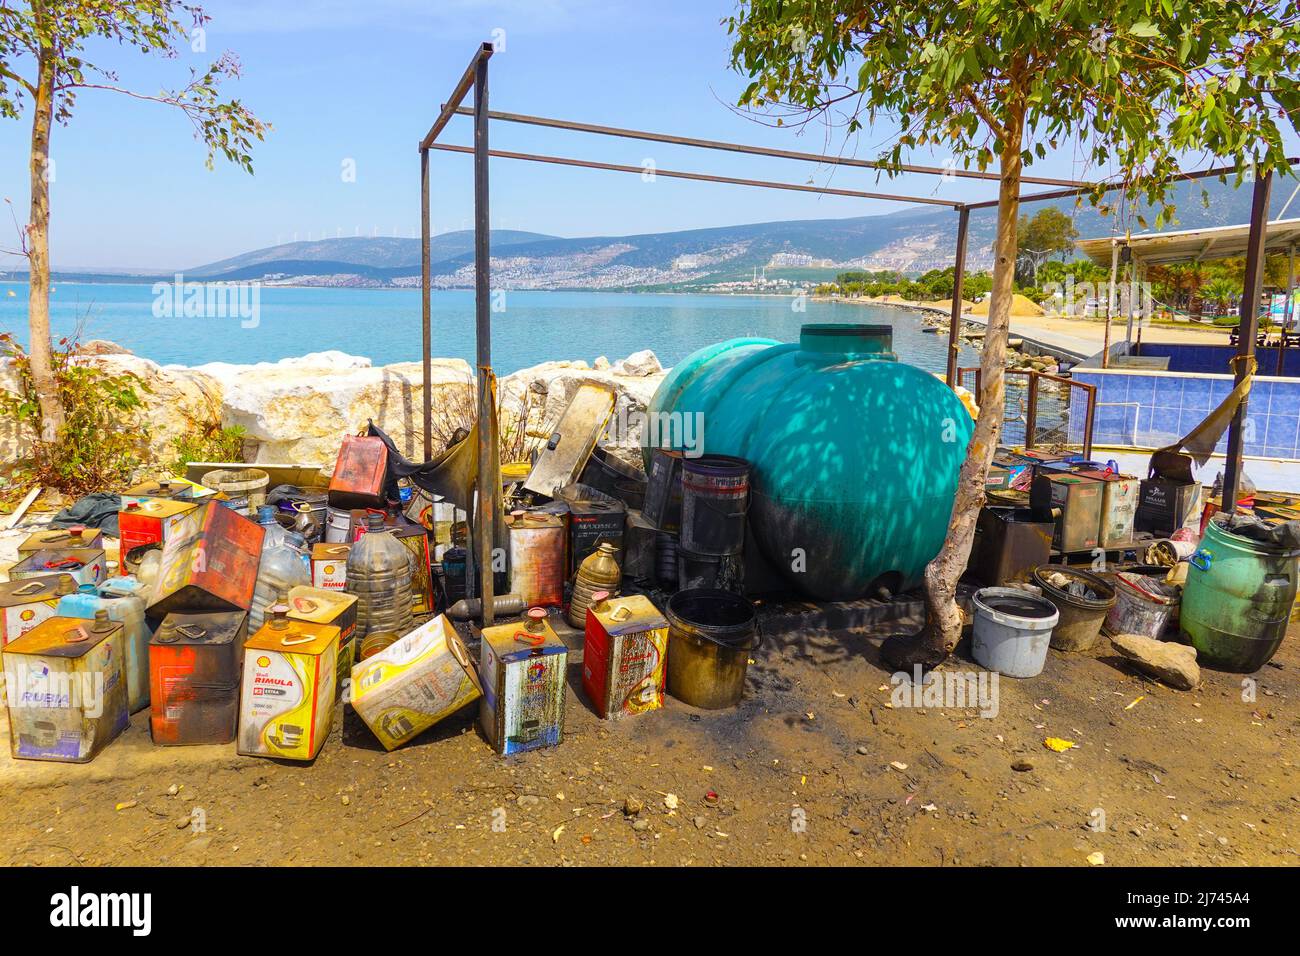 A place for dumping old cooking oil and engine oil, Akbuk, Didim, Turkey Stock Photo